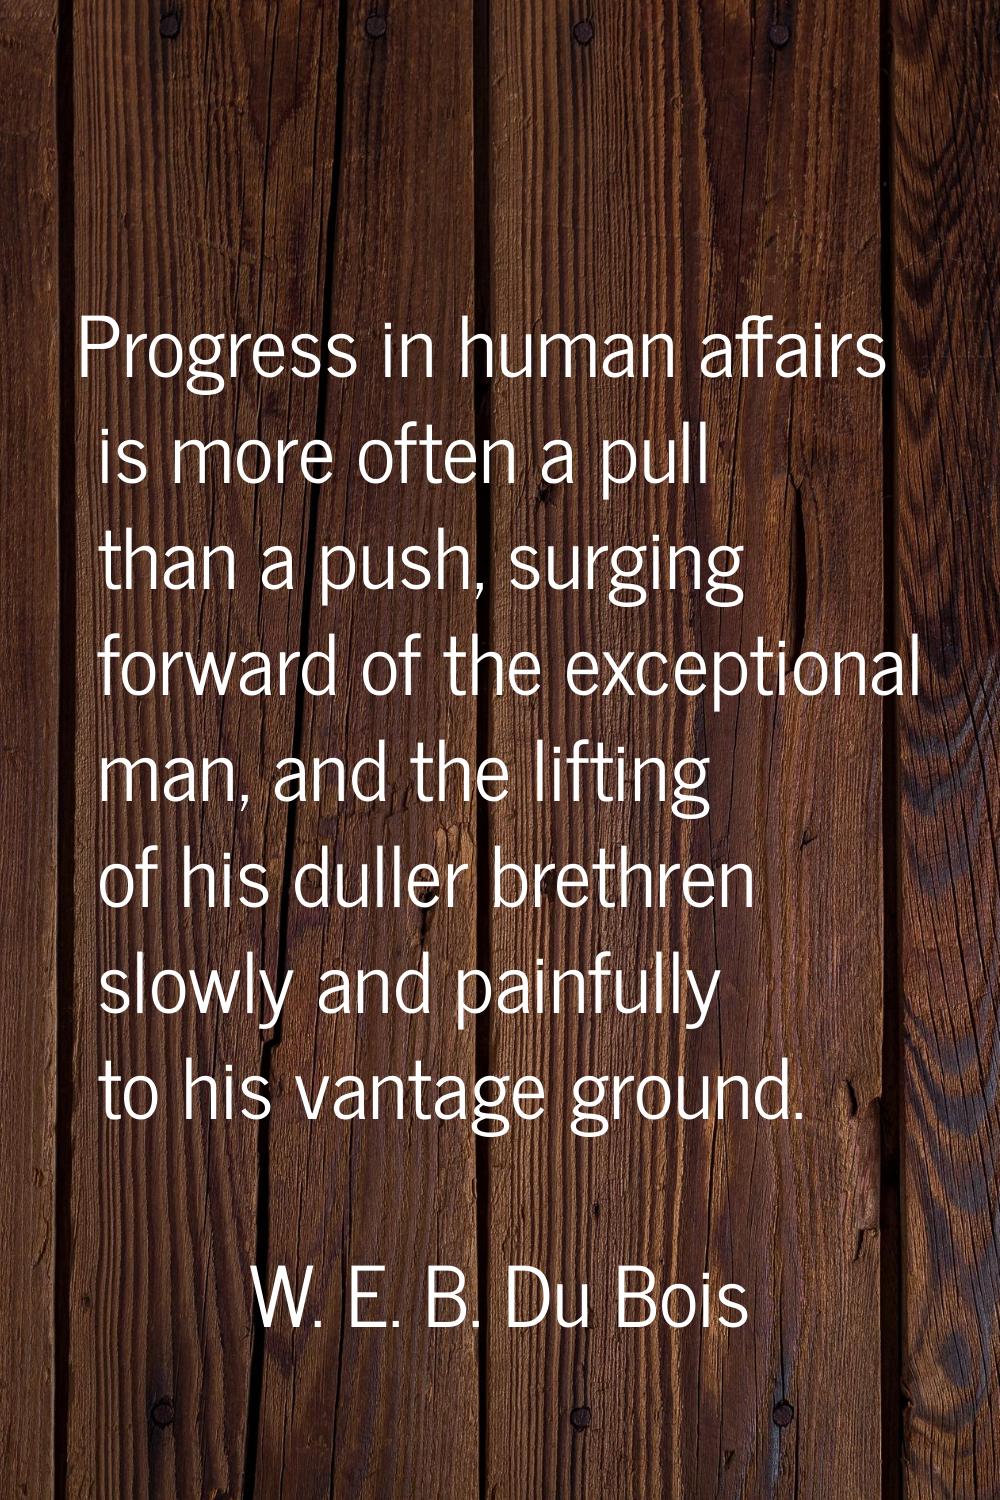 Progress in human affairs is more often a pull than a push, surging forward of the exceptional man,